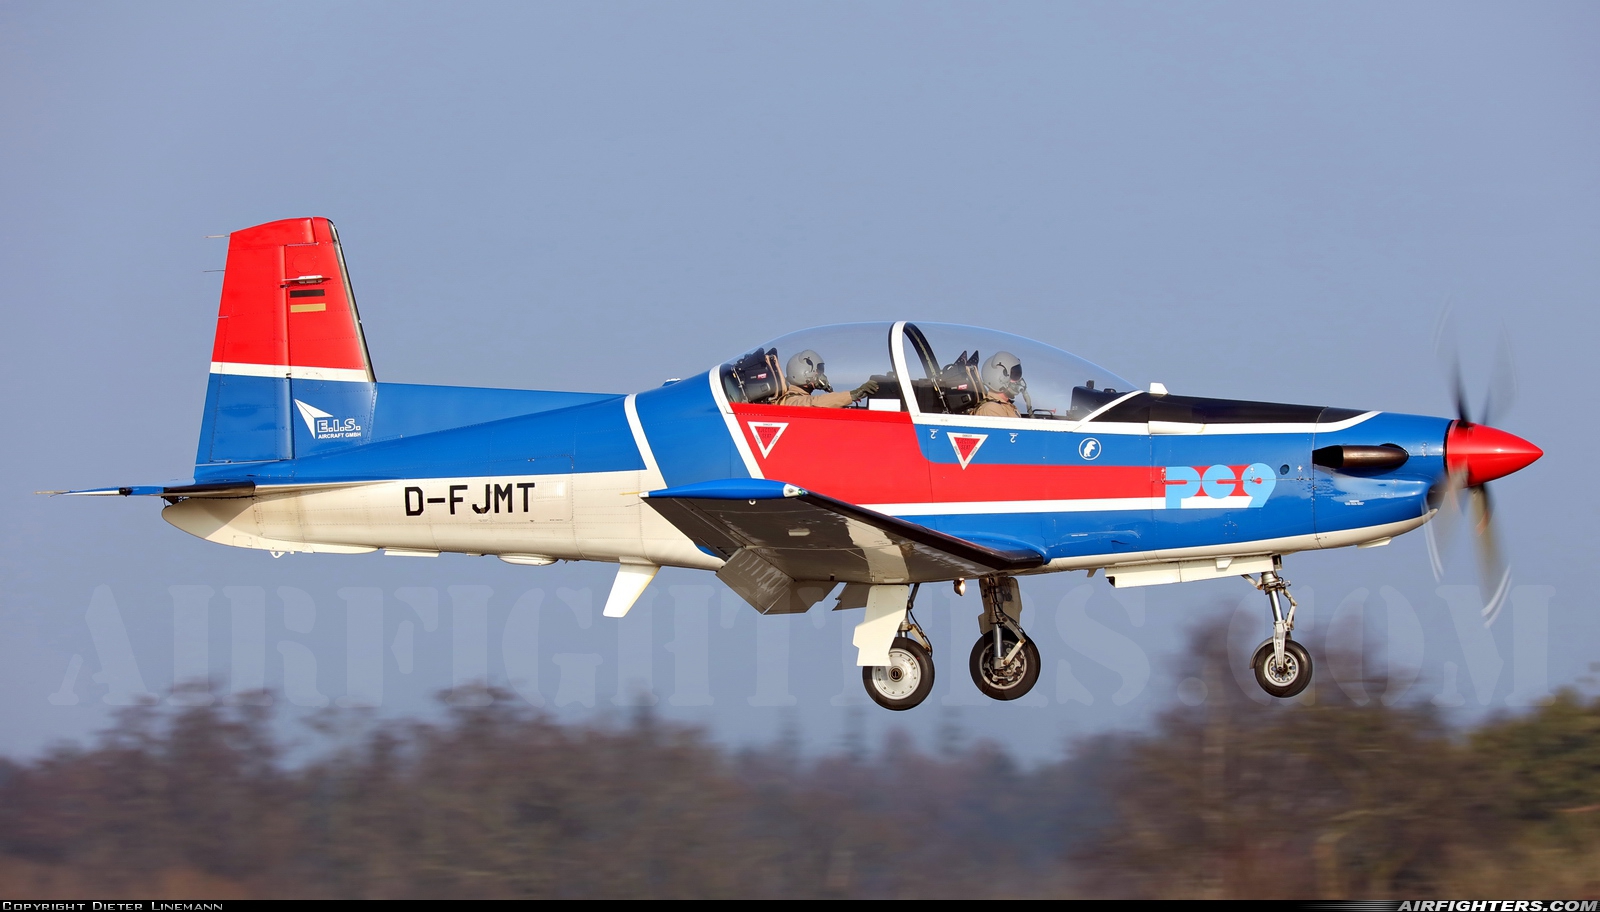 Company Owned - E.I.S. Aircraft GmbH Pilatus PC-9B D-FJMT at Wittmundhafen (Wittmund) (ETNT), Germany